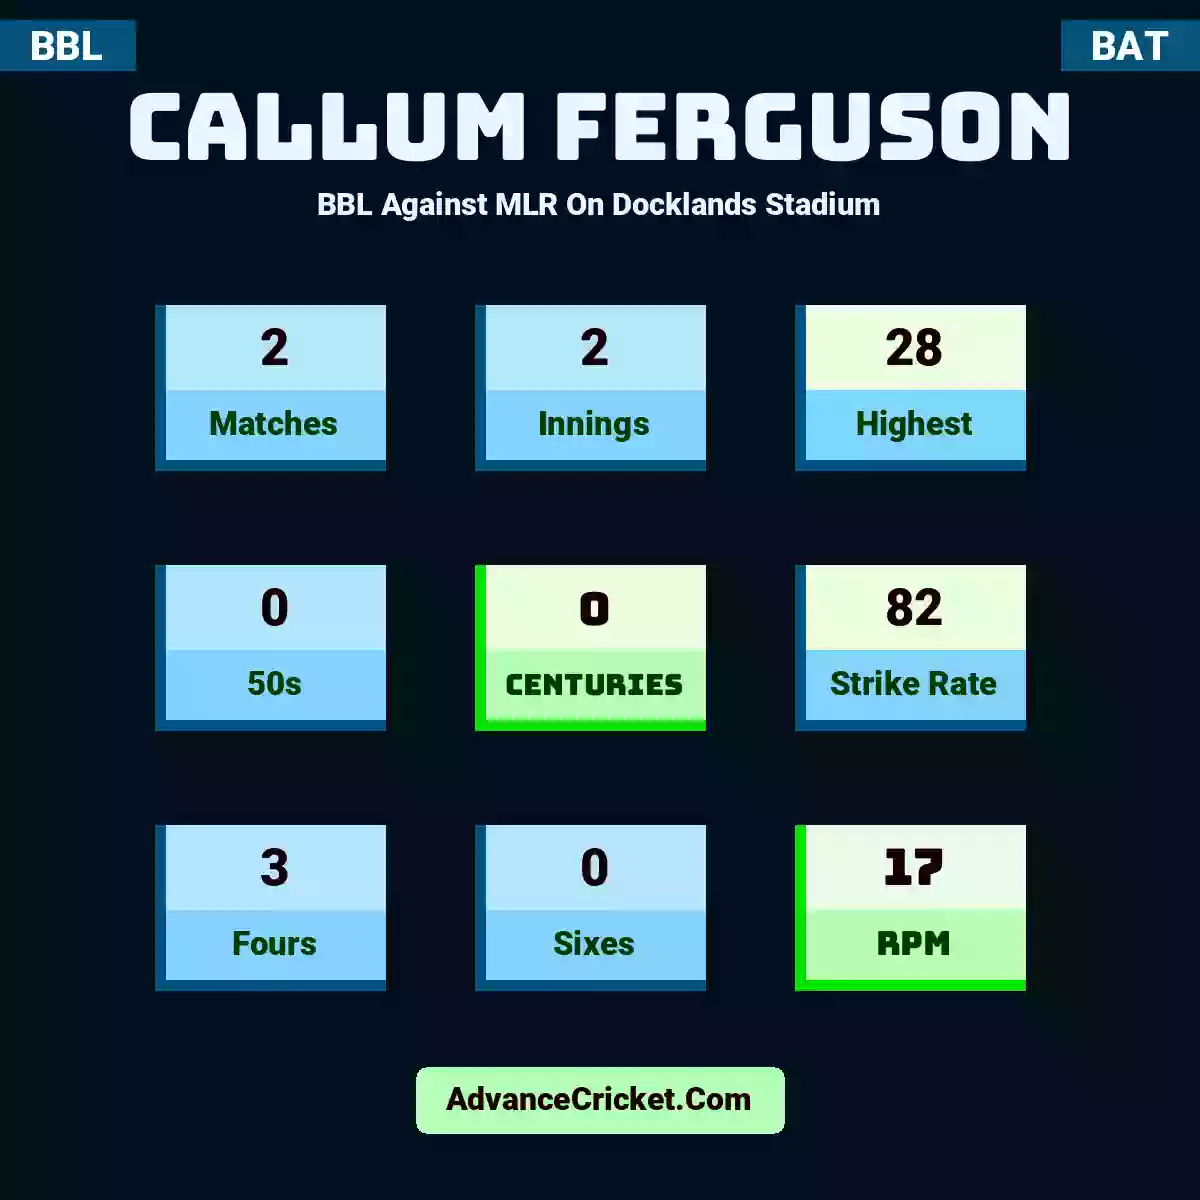 Callum Ferguson BBL  Against MLR On Docklands Stadium, Callum Ferguson played 2 matches, scored 28 runs as highest, 0 half-centuries, and 0 centuries, with a strike rate of 82. C.Ferguson hit 3 fours and 0 sixes, with an RPM of 17.